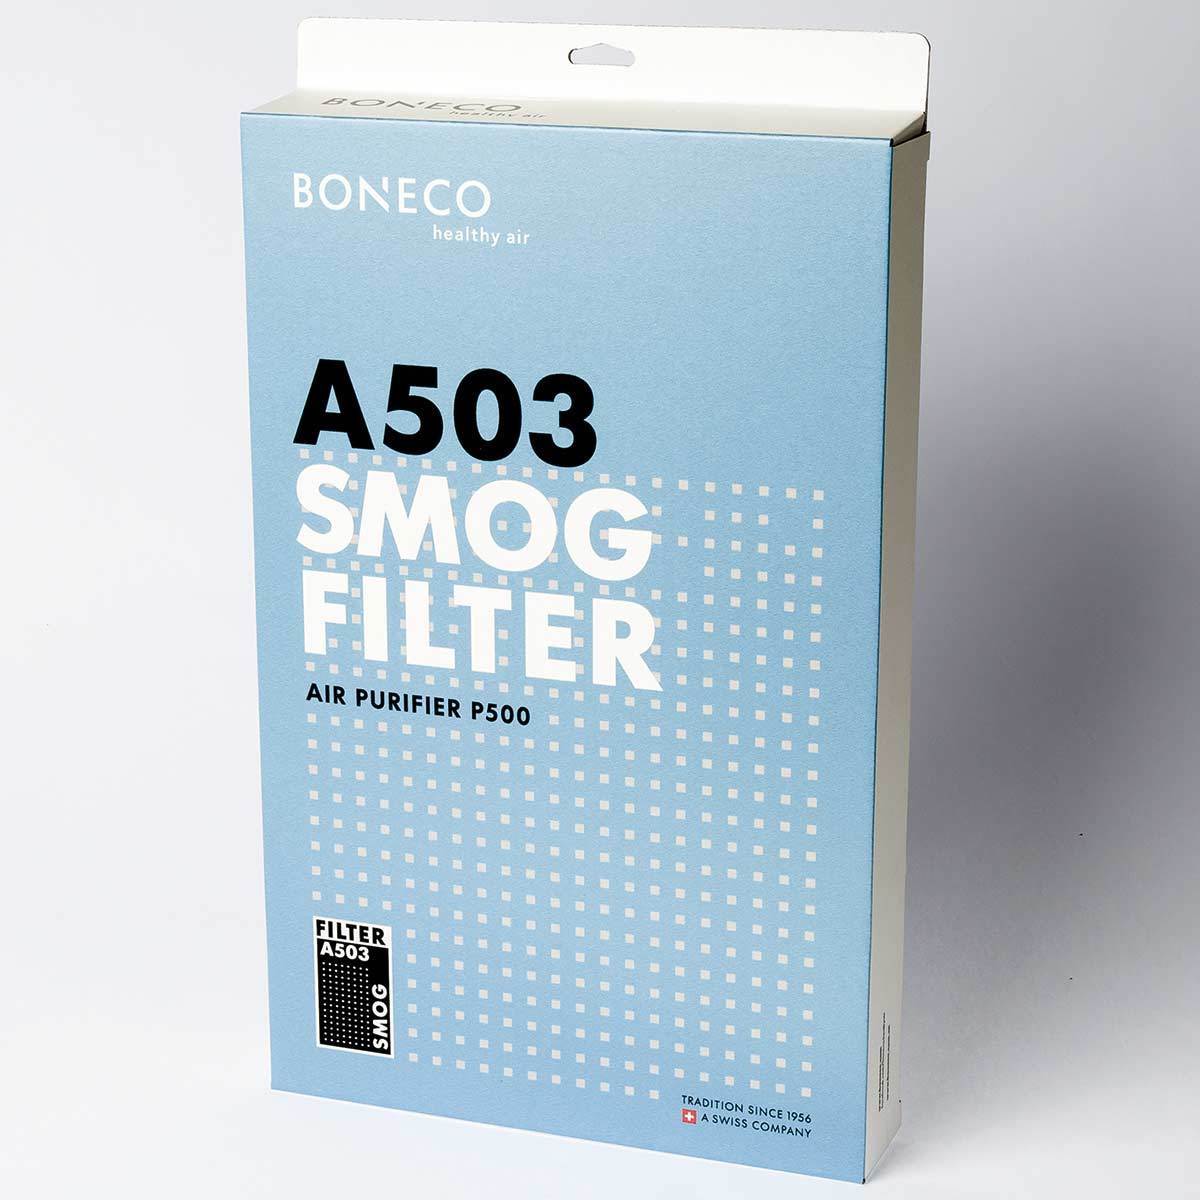 Boneco A503 Replacement Smog Filter for P500 Air Purifier